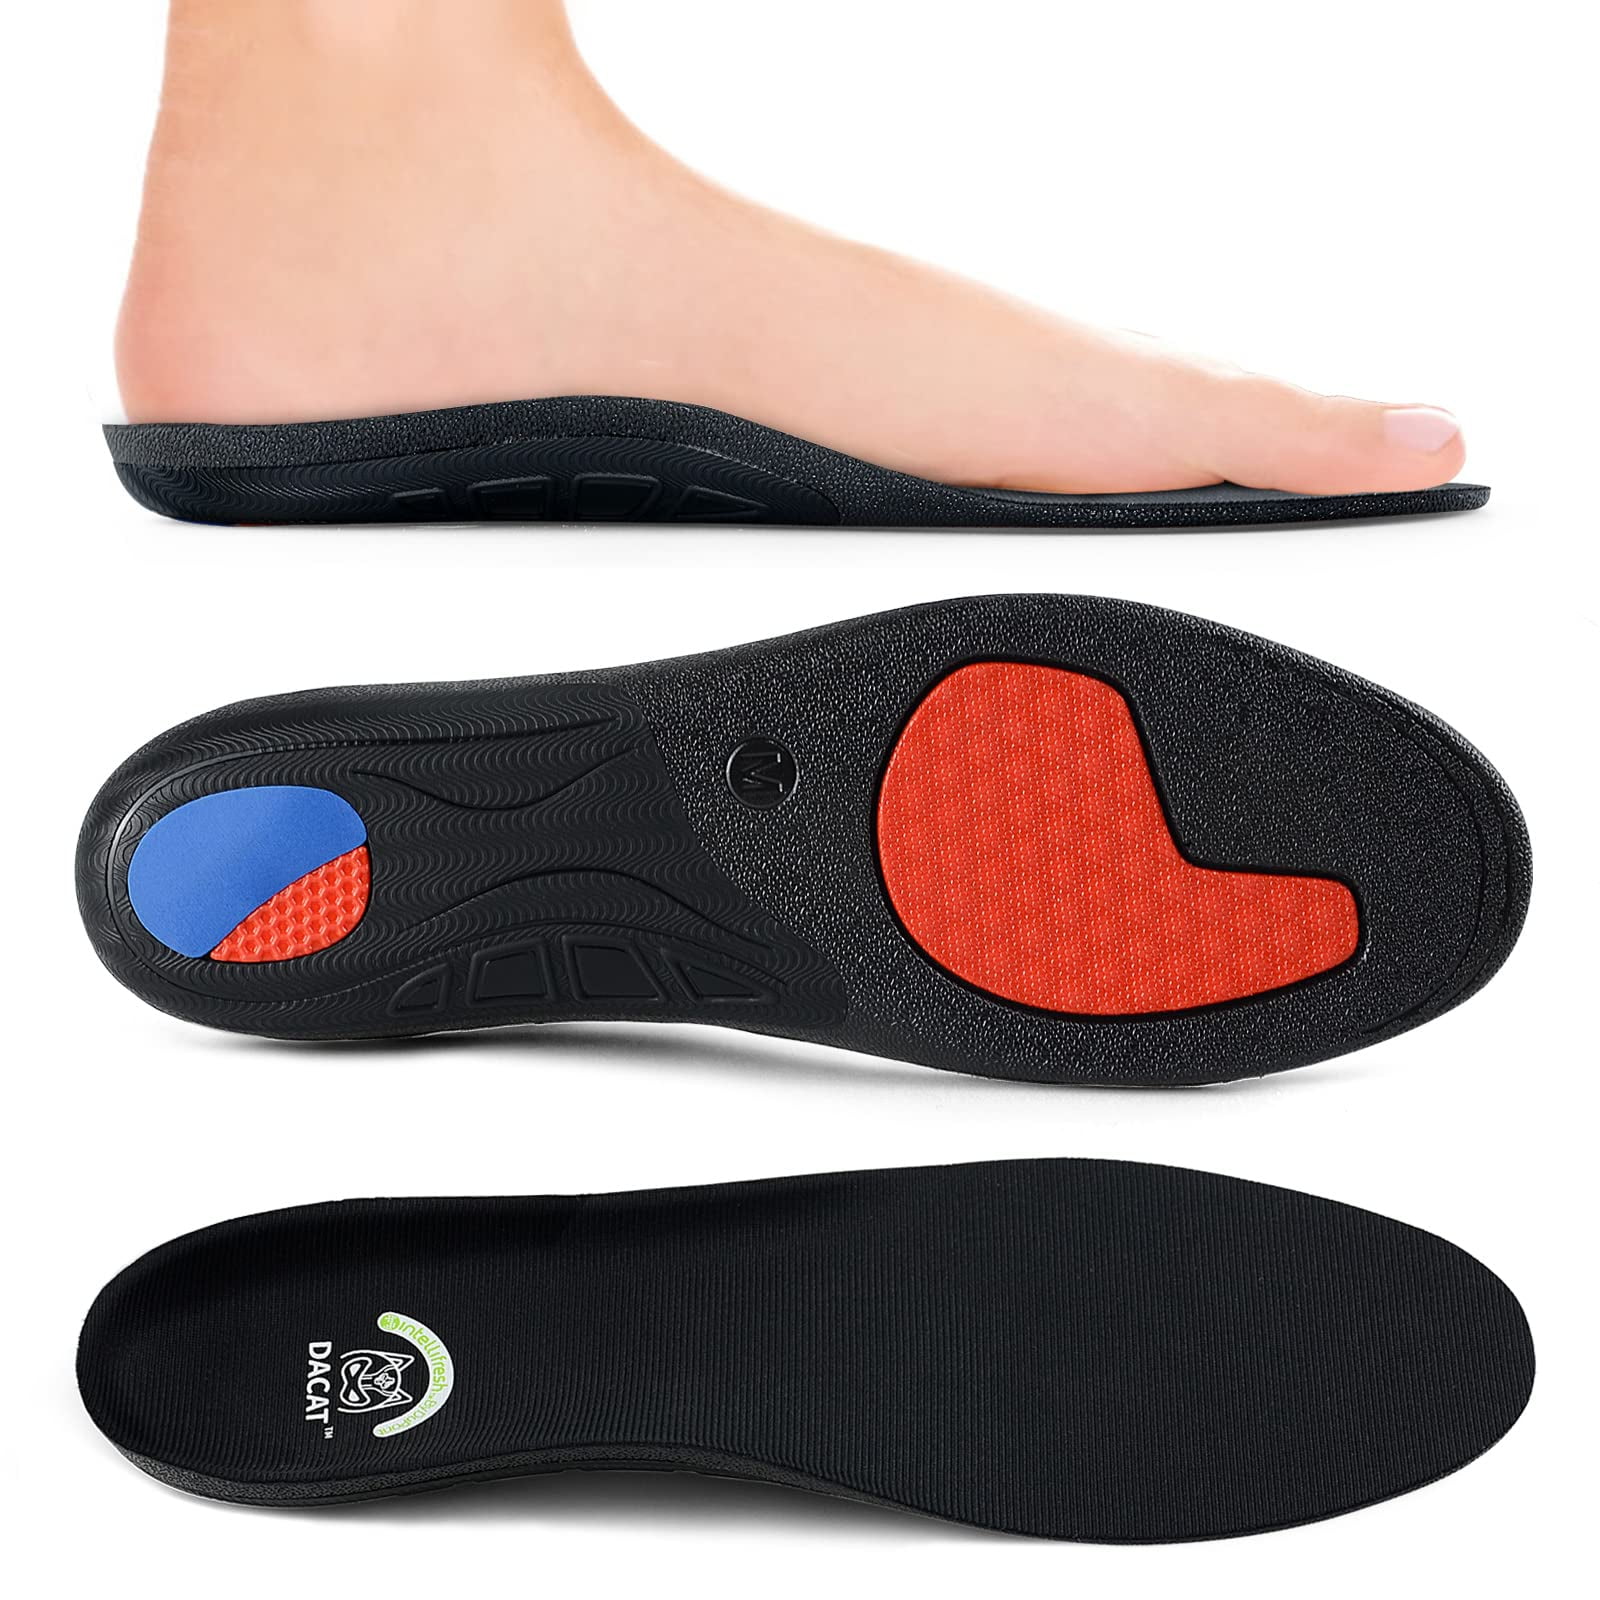 DACAT Plantar Fasciitis Insoles for Standing All Day - Work Insoles Gel ...